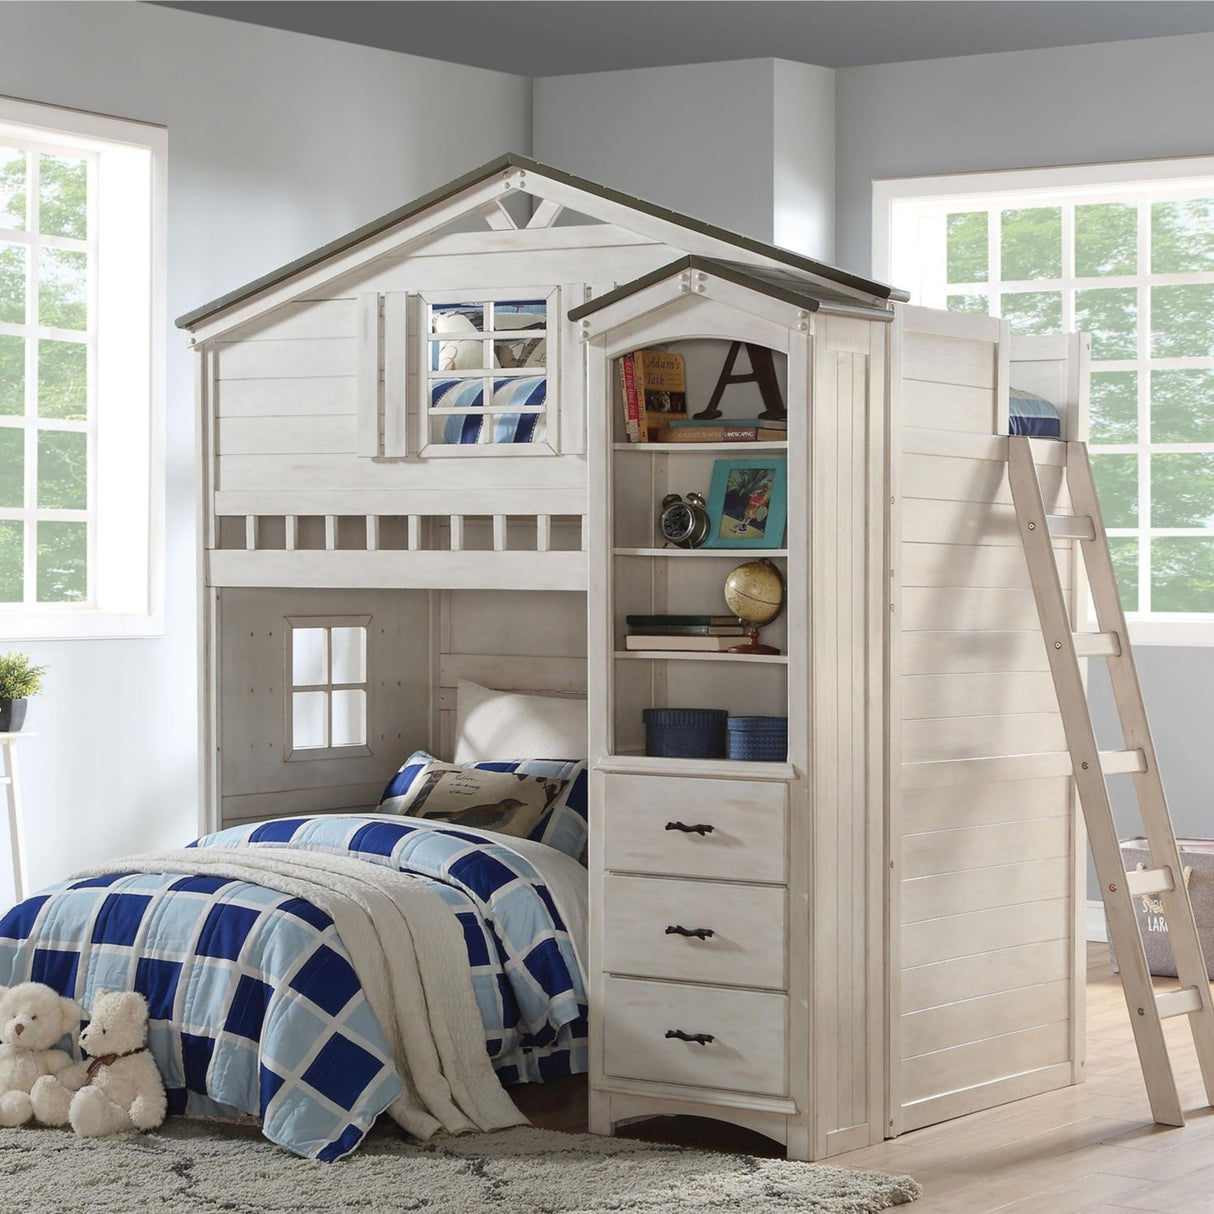 43" X 80" X 88" Weathered White Washed Gray Wood Loft Bed (Twin Size) - Tuesday Morning-Loft Beds